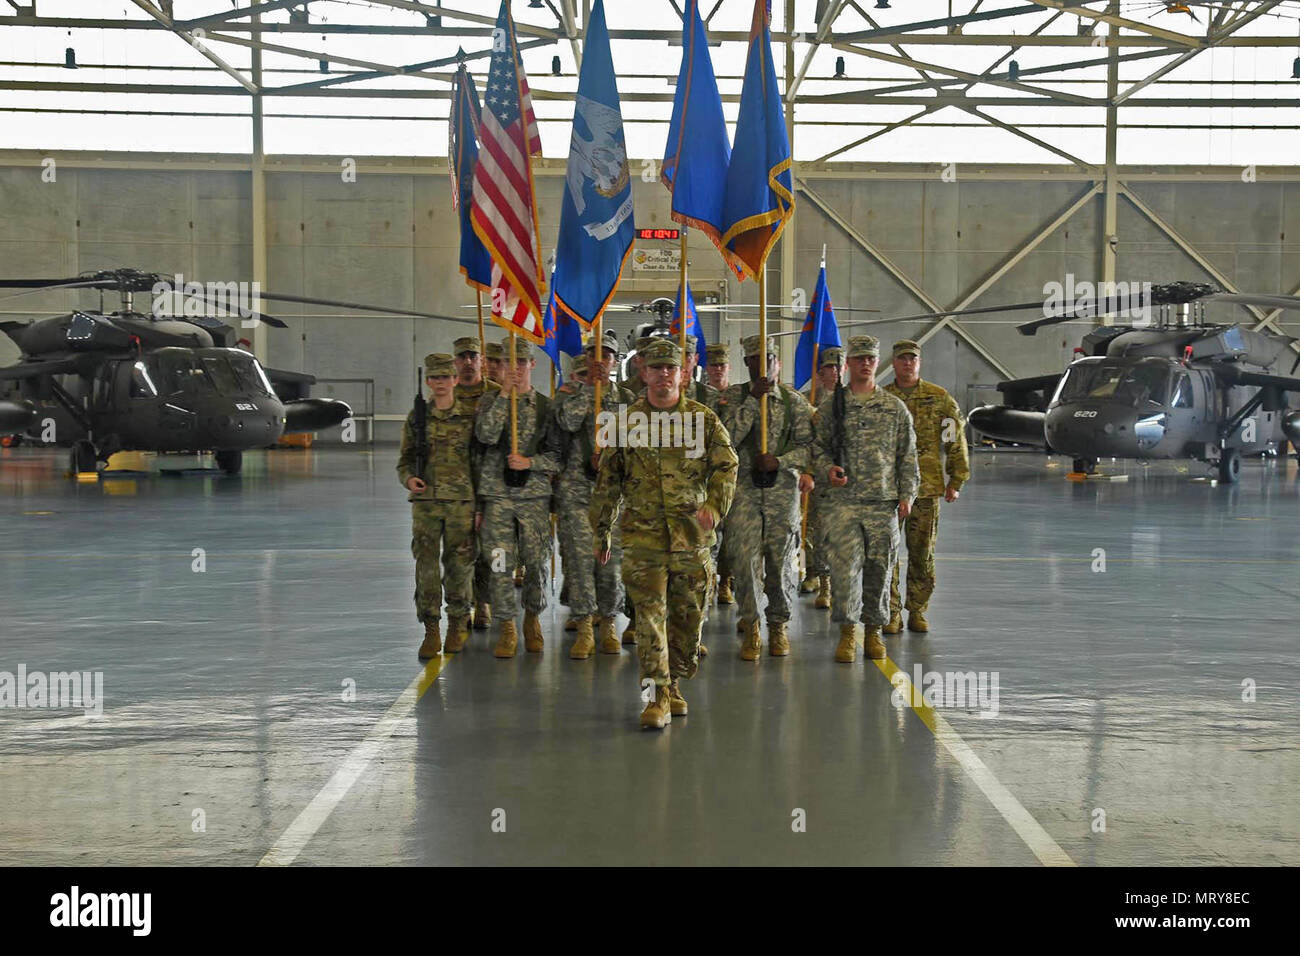 Louisiana National Guardsman Maj. Jacques Comeaux leads the State Aviation Command colors forward during an official change of command and promotion ceremony at Army Aviation Facility #1 in Hammond, Louisiana, July 9, 2017. During the ceremony, Brig. Gen. Patrick Bossetta was pinned with the one-star rank after relinquishing command of the State Aviation Command to Col. John Plunkett and command of the 204th Theater Airfield Operations Group to Lt. Col. John Bonnette. (U.S. Army National Guard photo by Sgt. Garrett L. Dipuma) Stock Photo